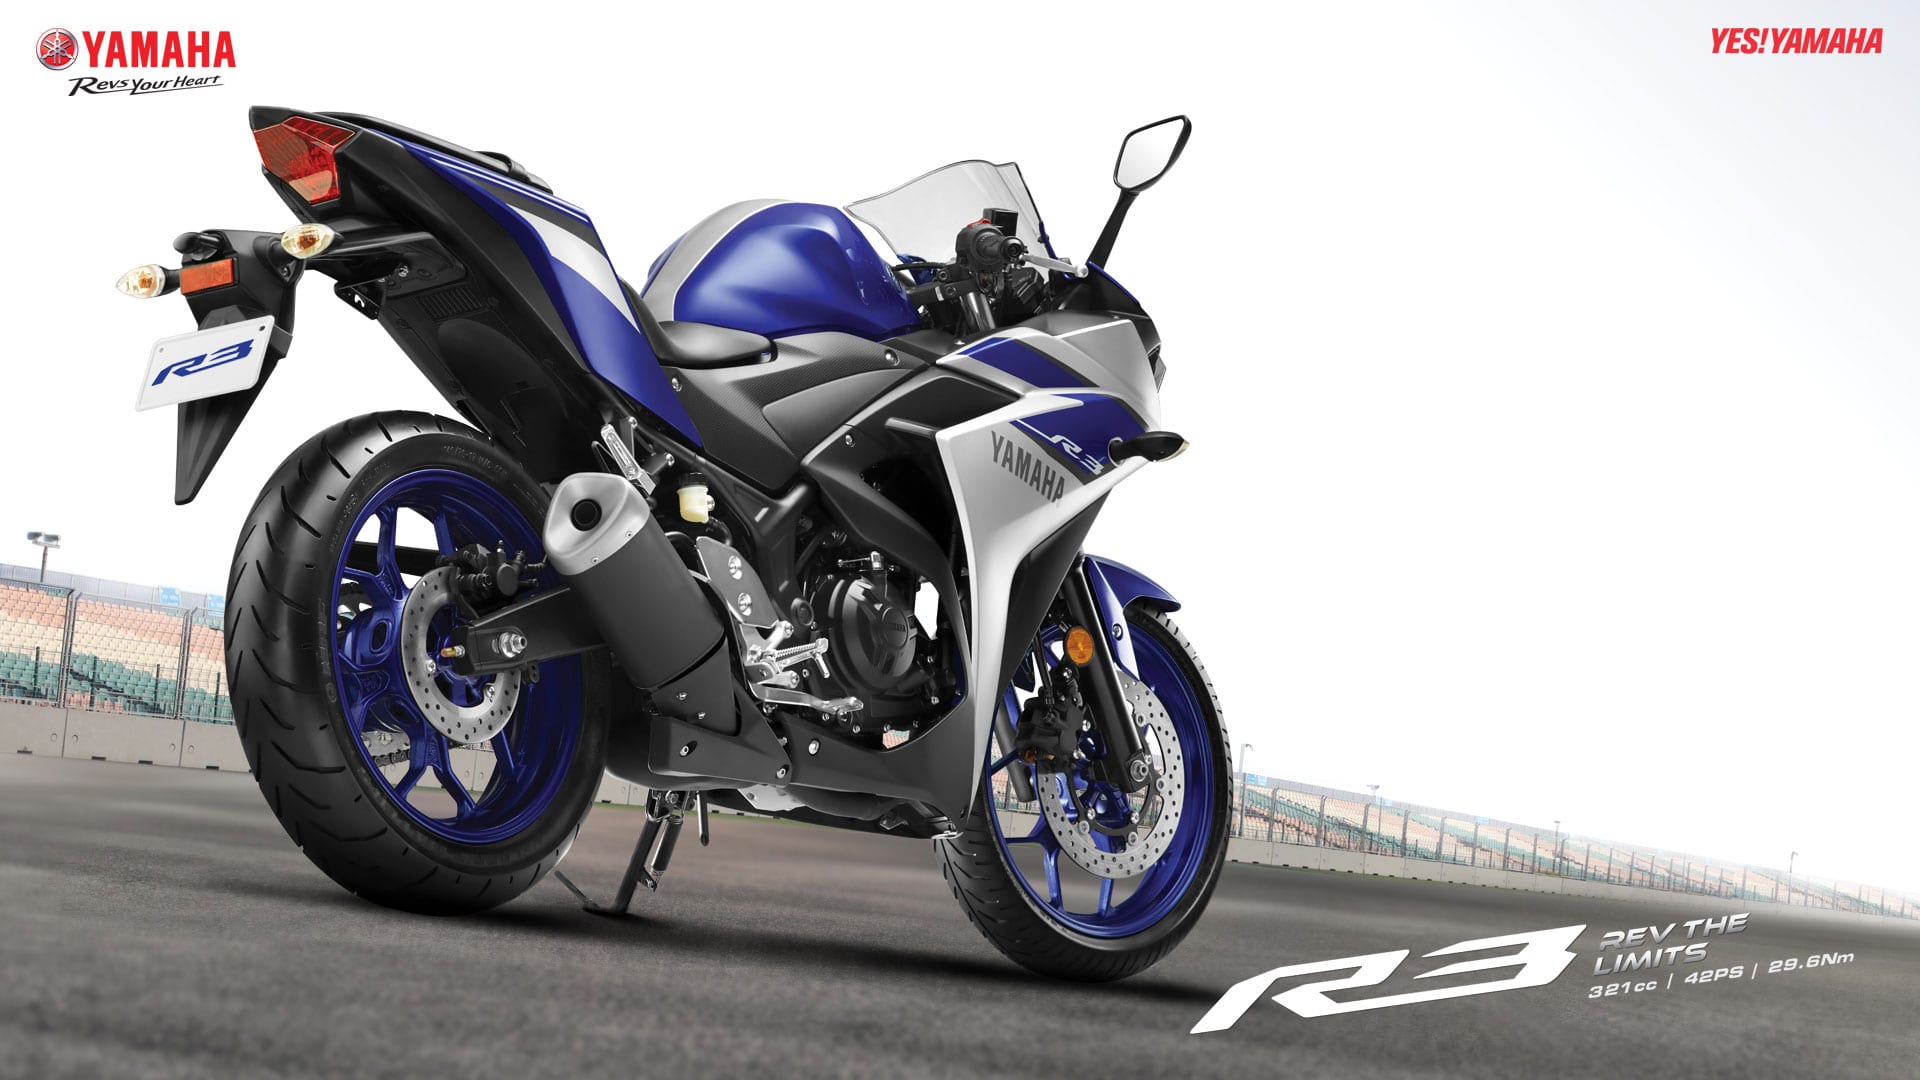 Yamaha Recalls 2015-2016 YZF R3 for Ignition Switch Issues